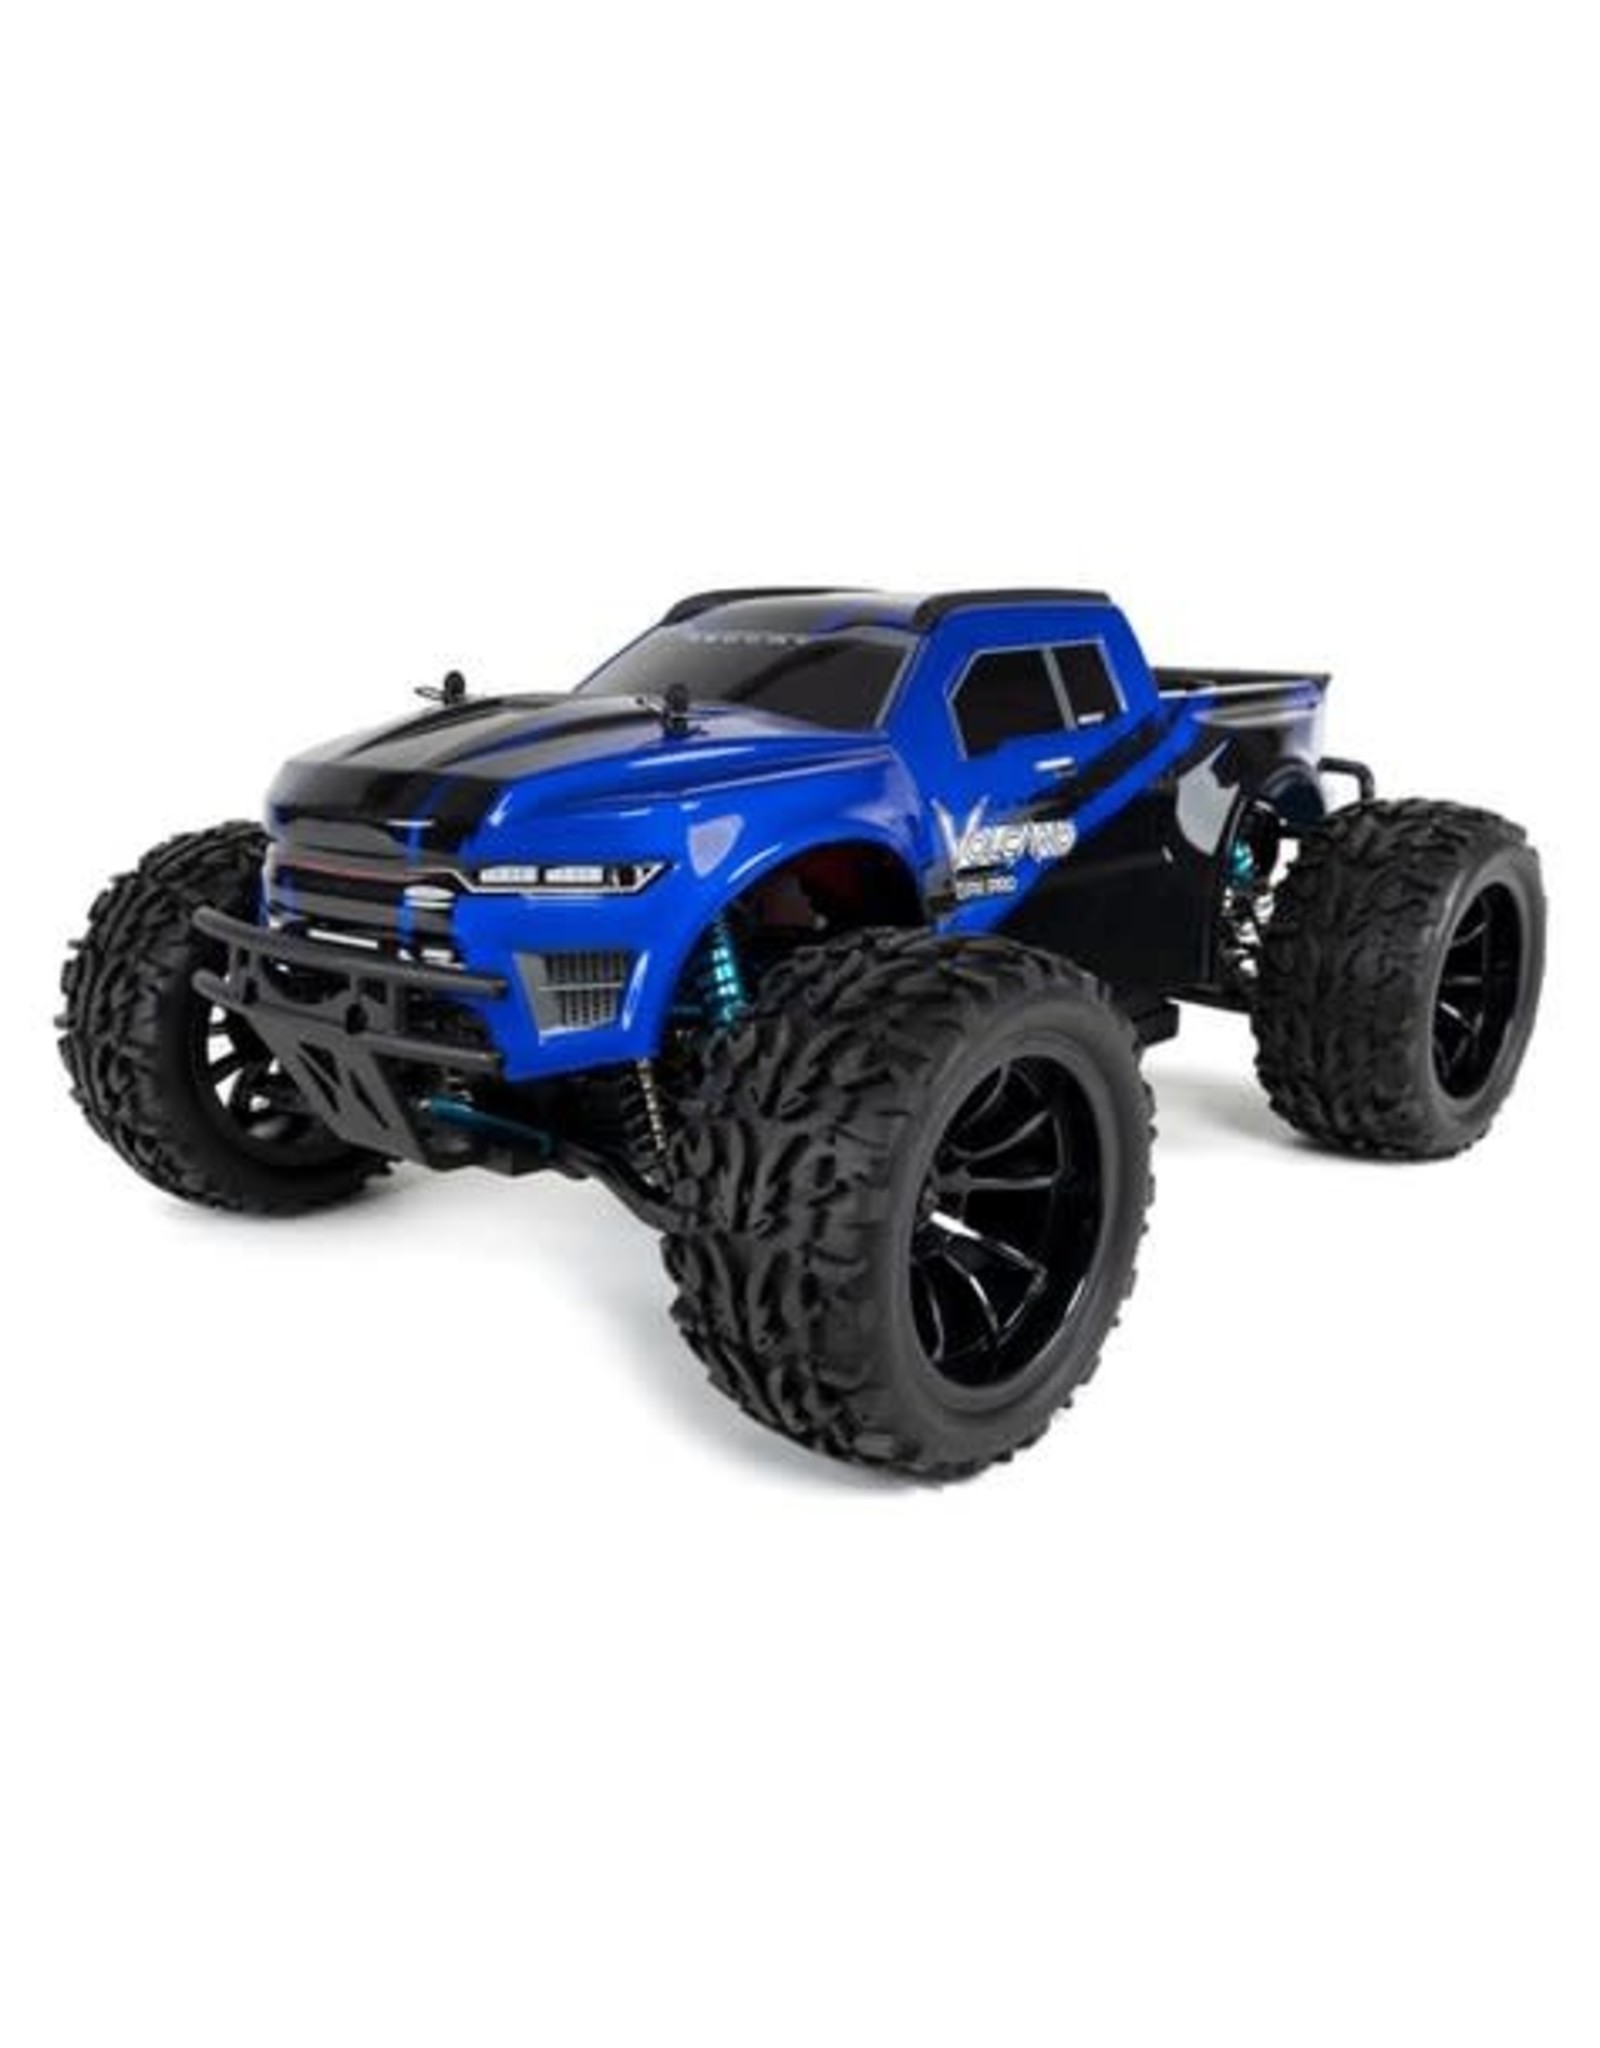 Redcat Racing Redcat Volcano EPX PRO RC Offroad Truck 1:10 Brushless Electric Truck